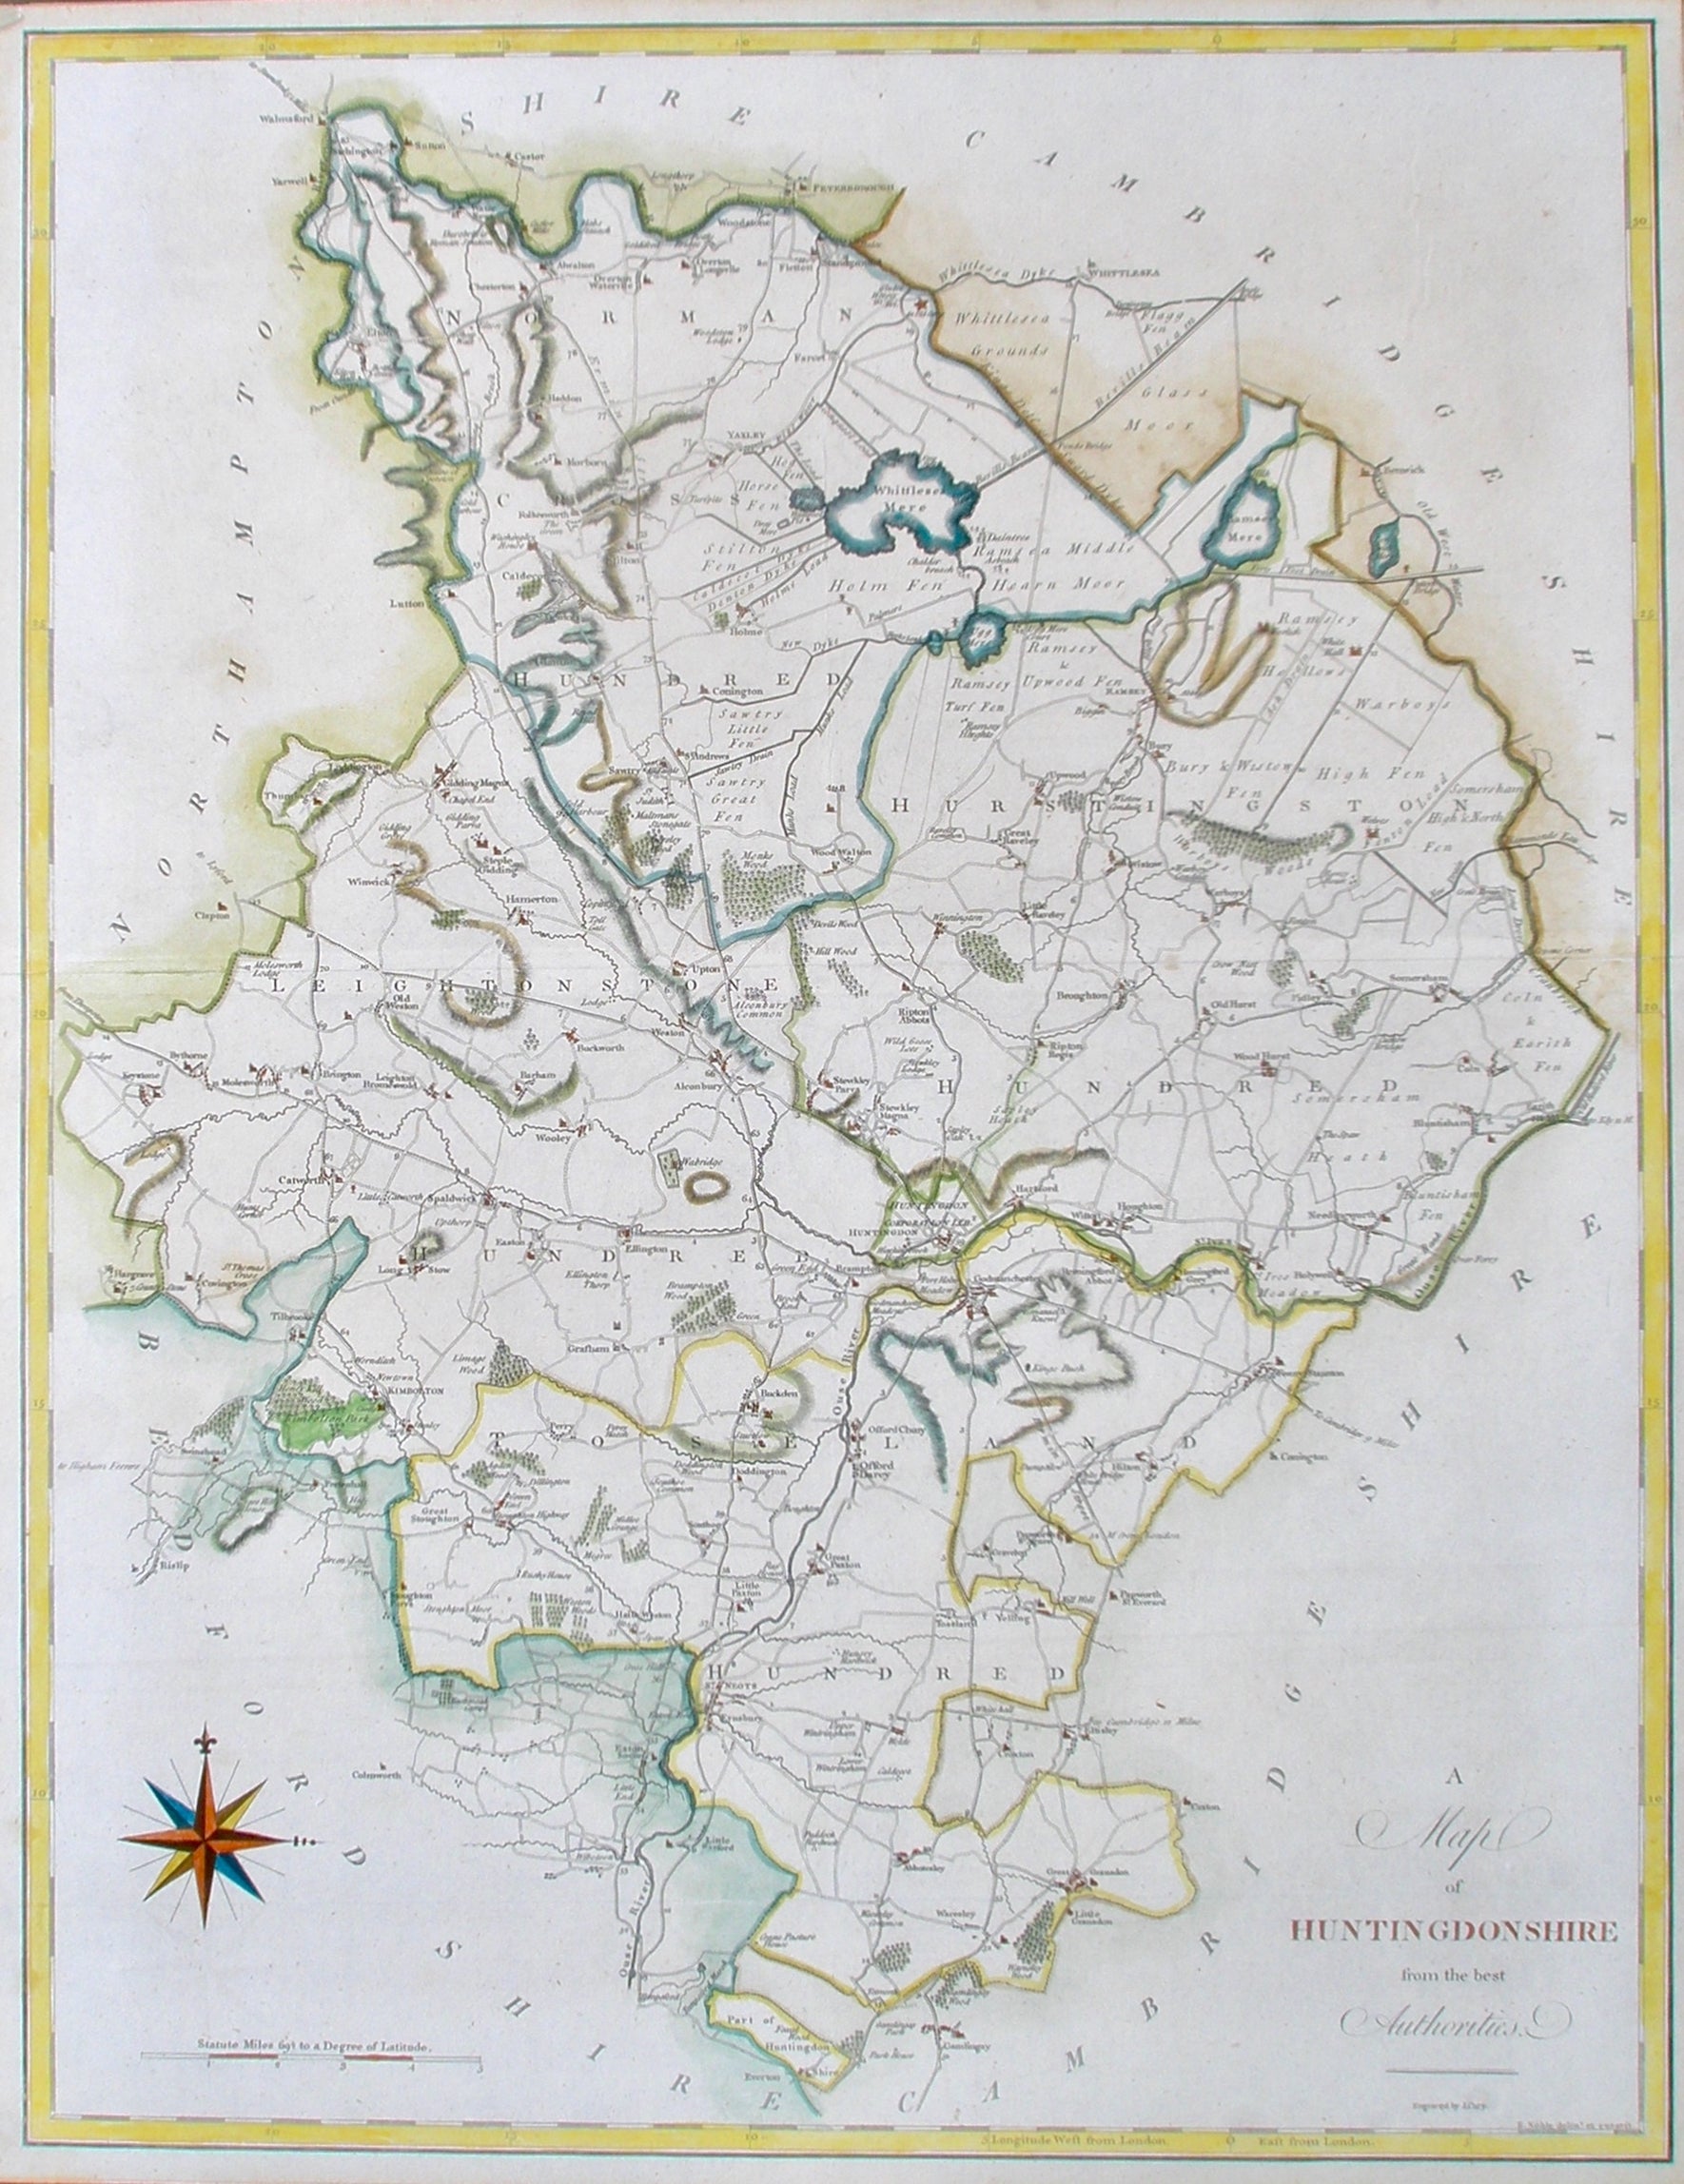 Map of Huntingdonshire by John Cary